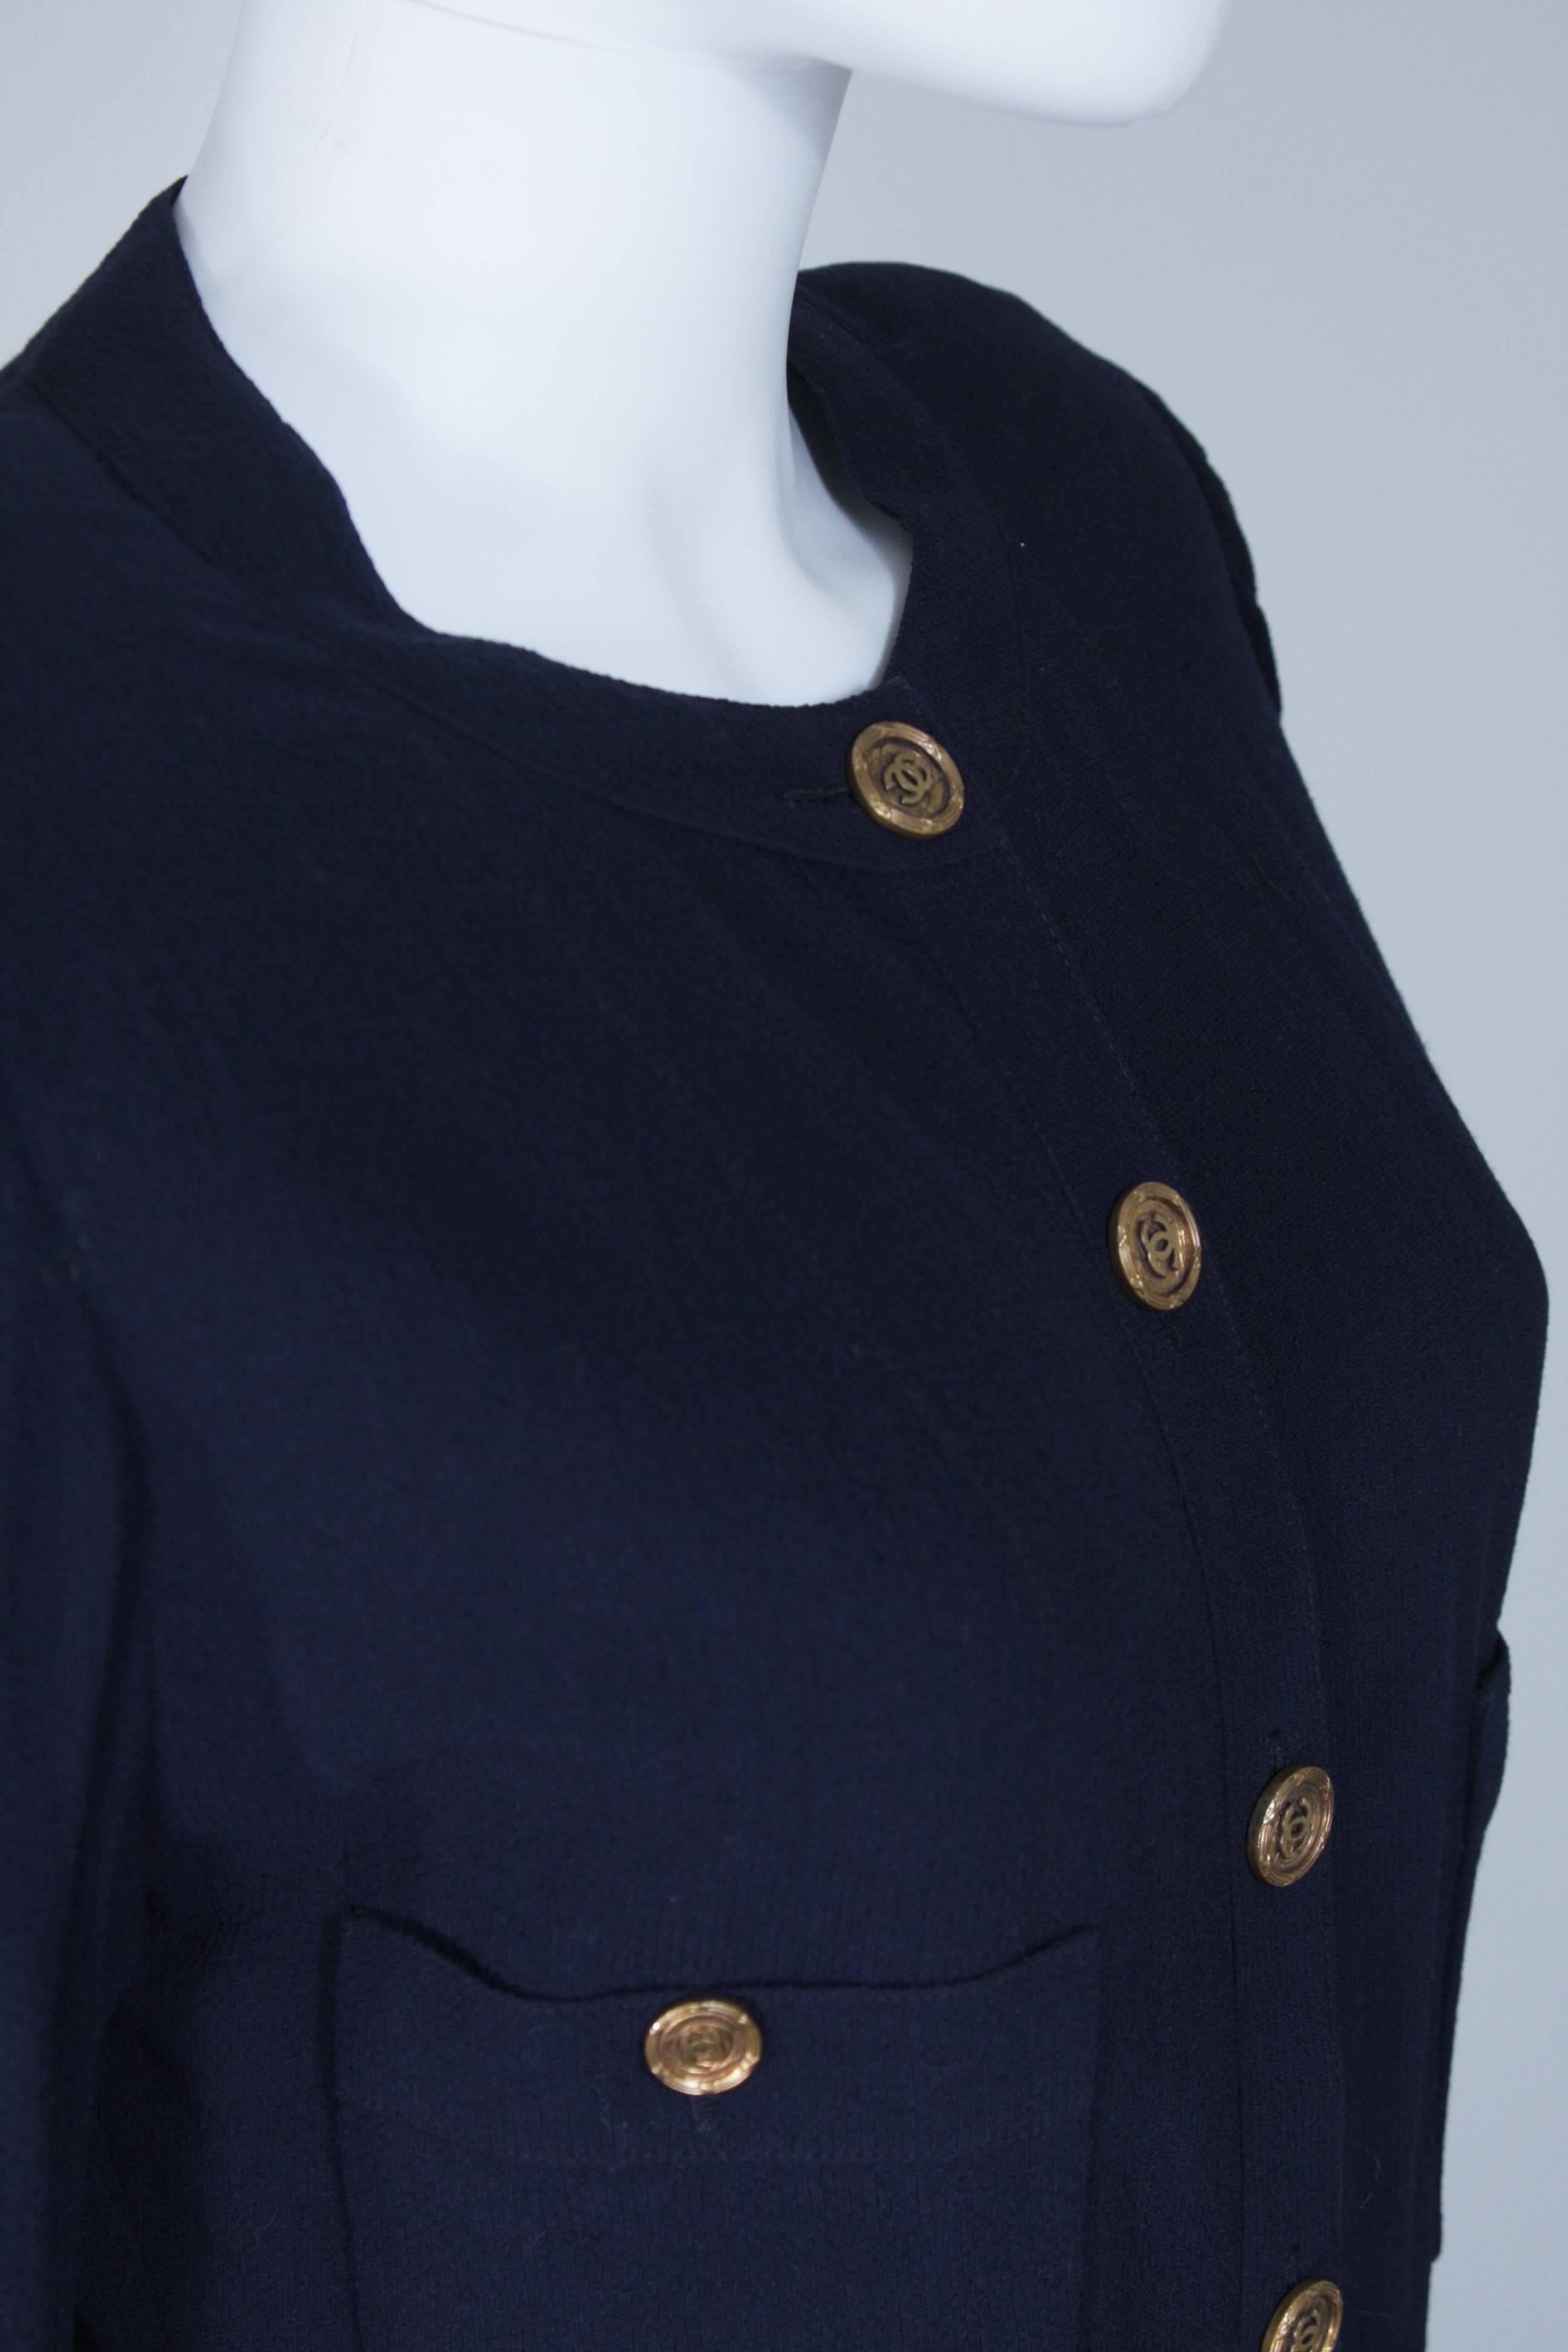 Women's CHANEL Attributed Navy Drape Dress with Belt & Gold Textured Logo Buttons Size 6